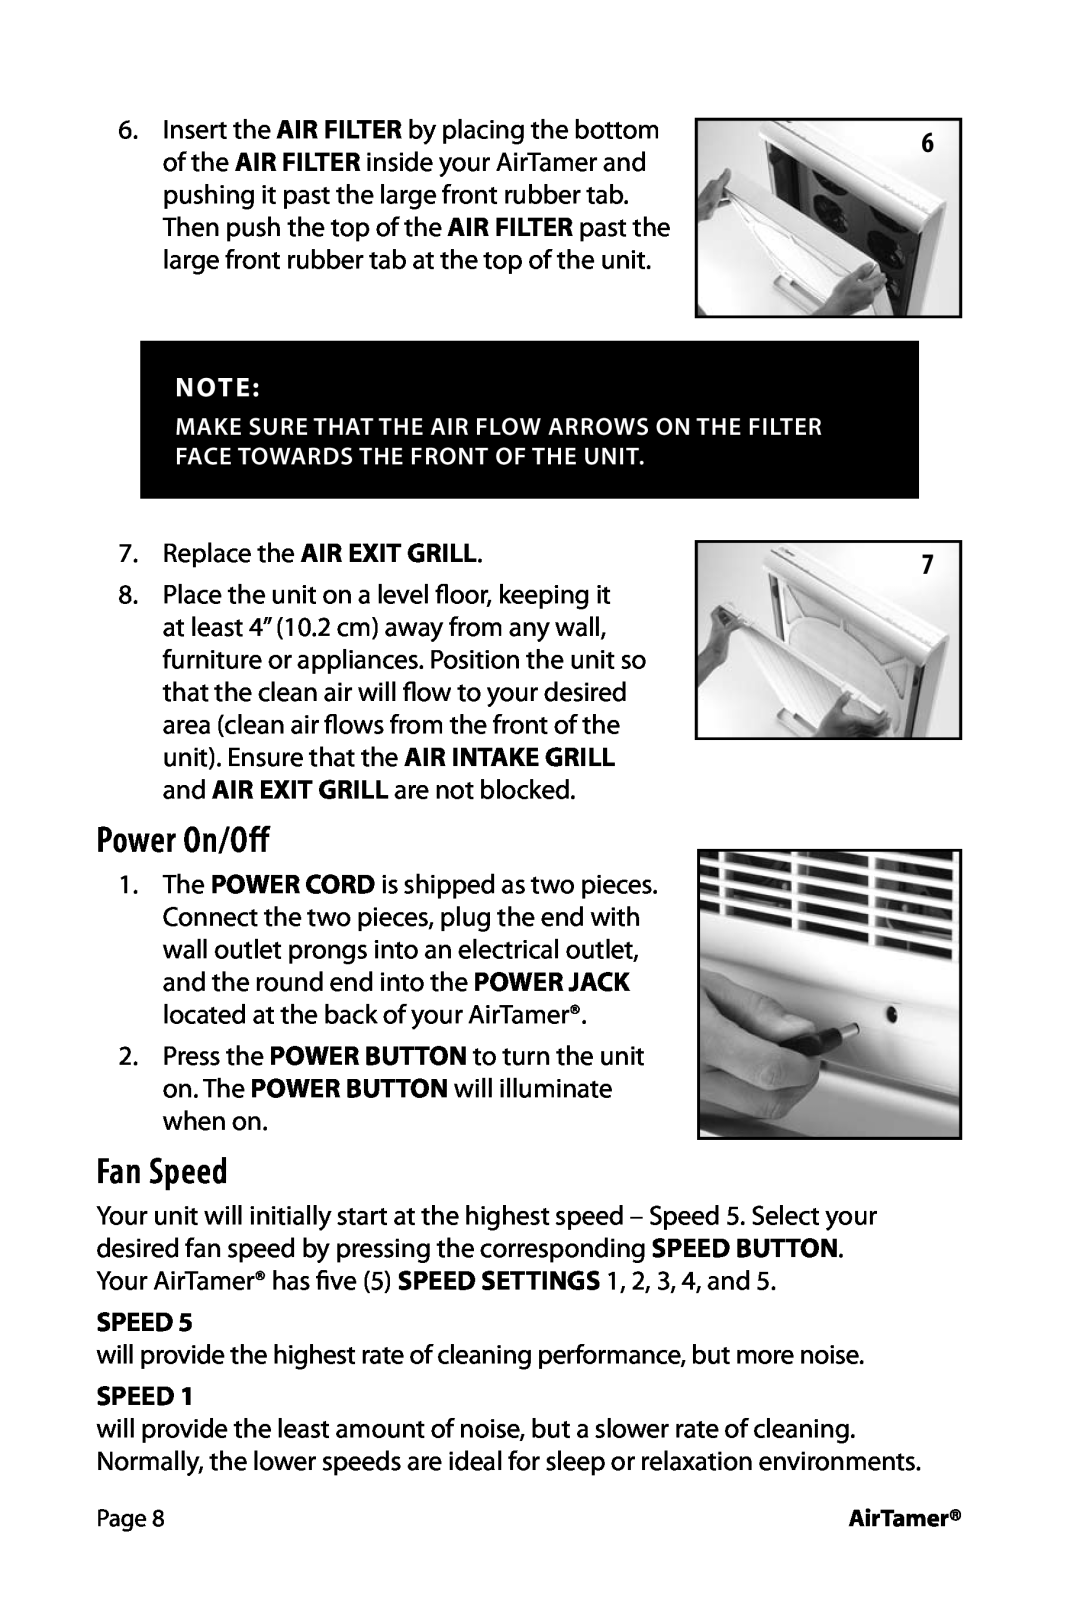 FilterStream A600 instruction manual Power On/Off, Fan Speed, Replace the AIR EXIT GRILL 